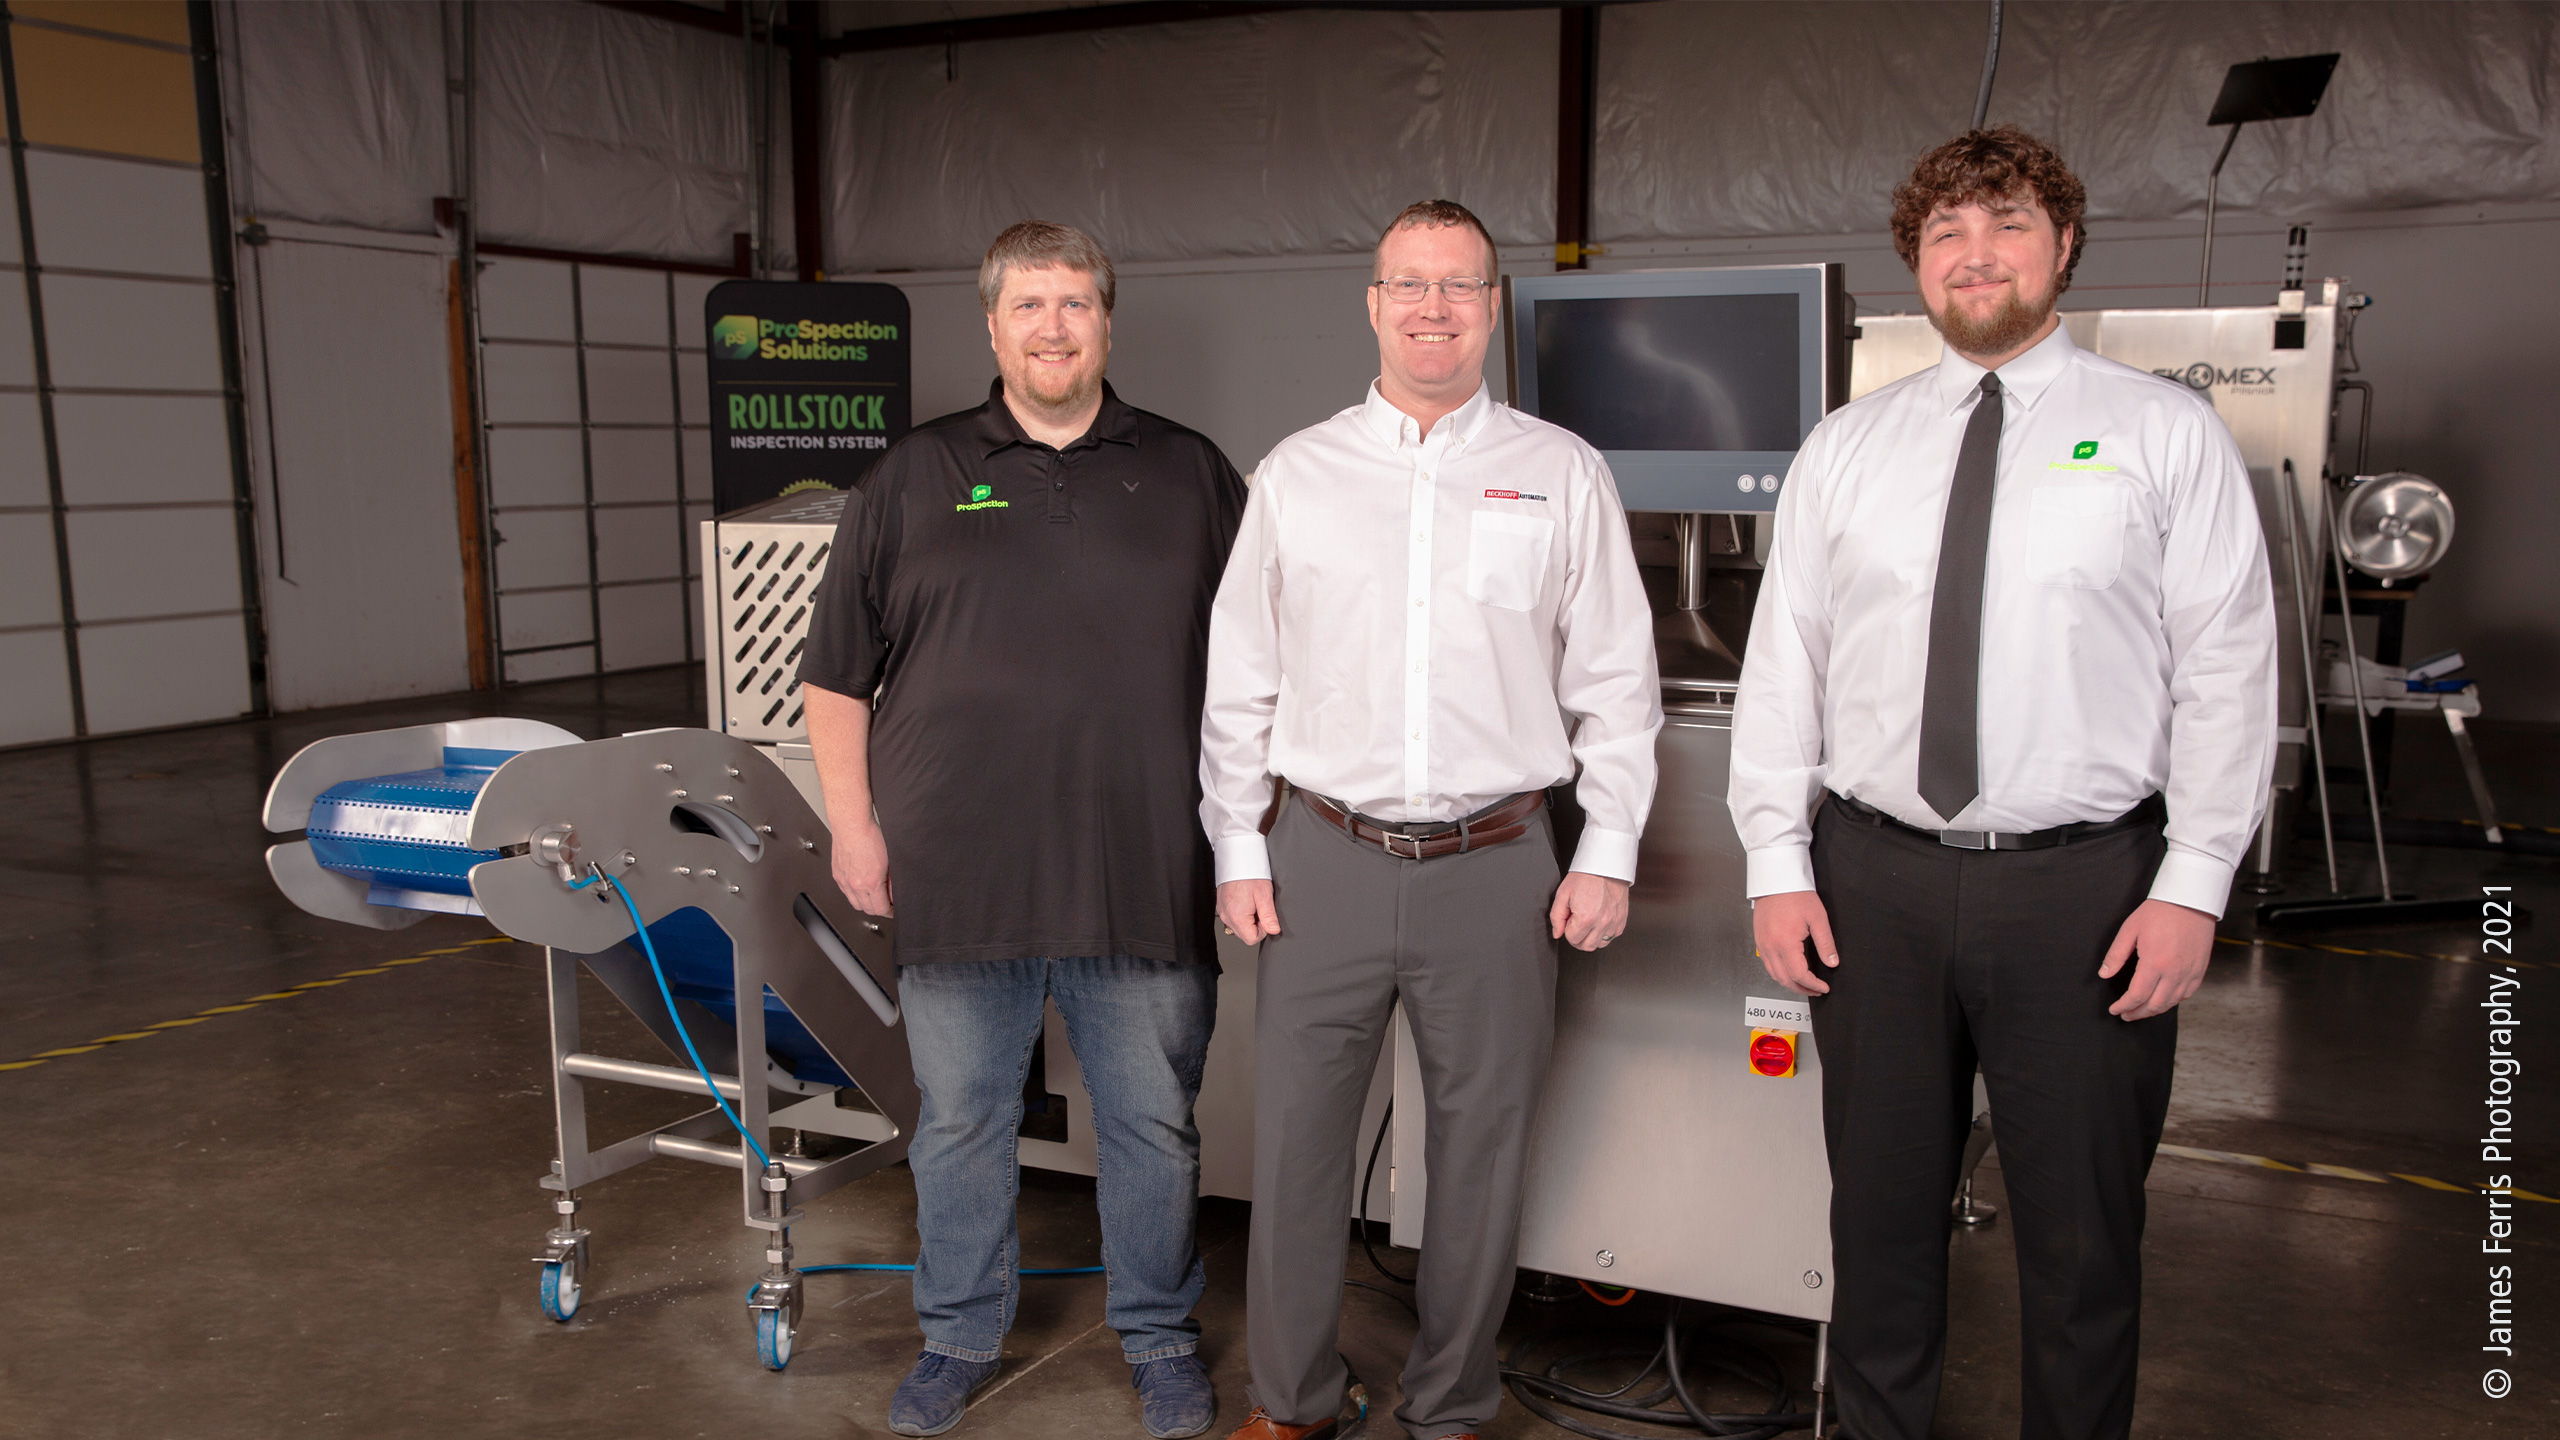 Senior Technician Kenneth Hobbie (left) and Vice President of Technology Kyle Knudsen (right) worked closely with Beckhoff Regional Sales Engineer Brandon Snell (middle) and other Beckhoff team members on the machine’s design and programming.  